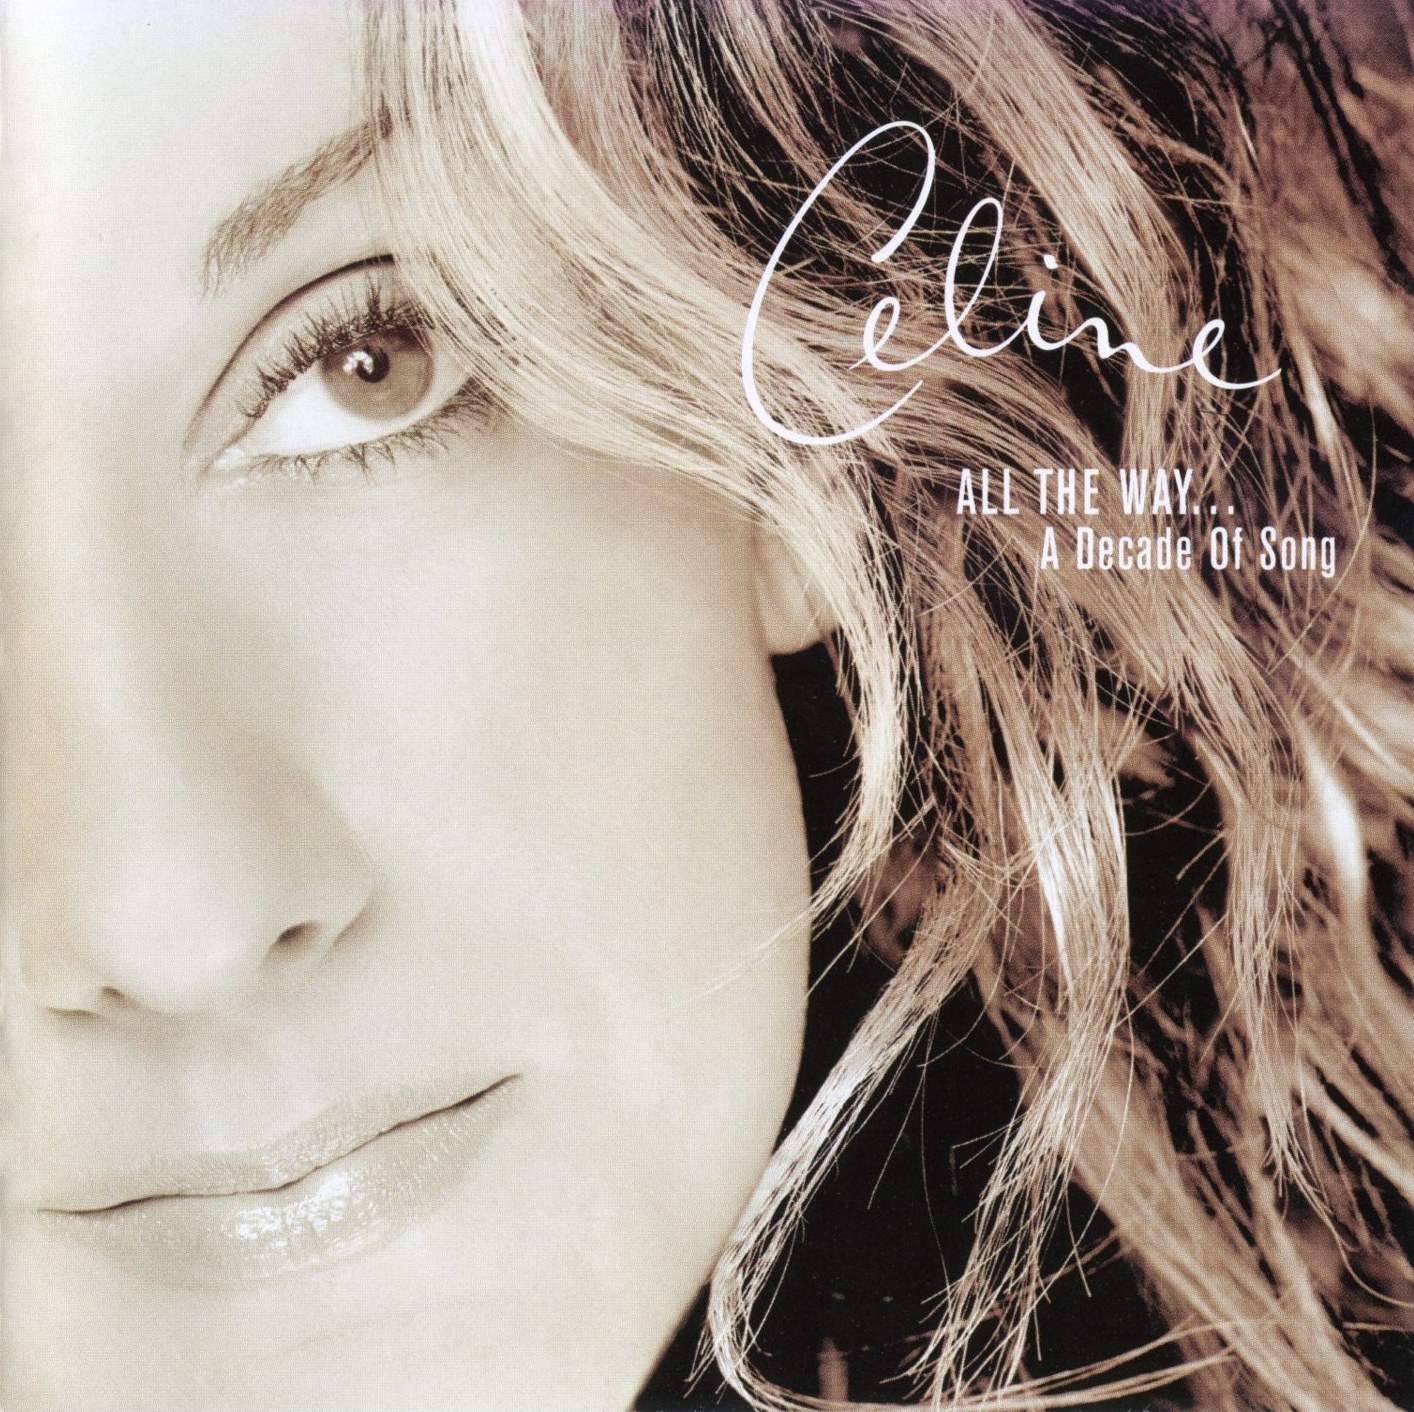 Celine Dion - All The Way... A Decade Of Song (1999)